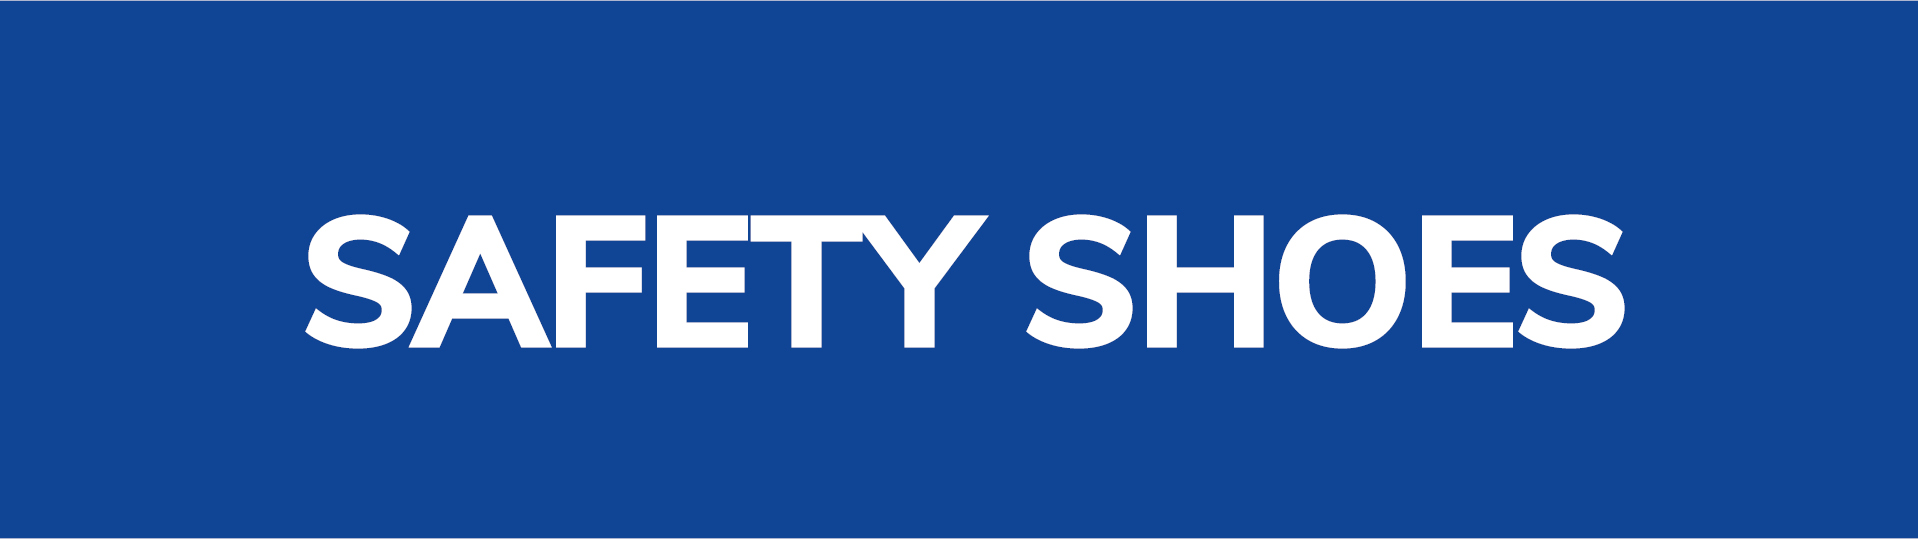 Safety Shoes - S10 Supplies